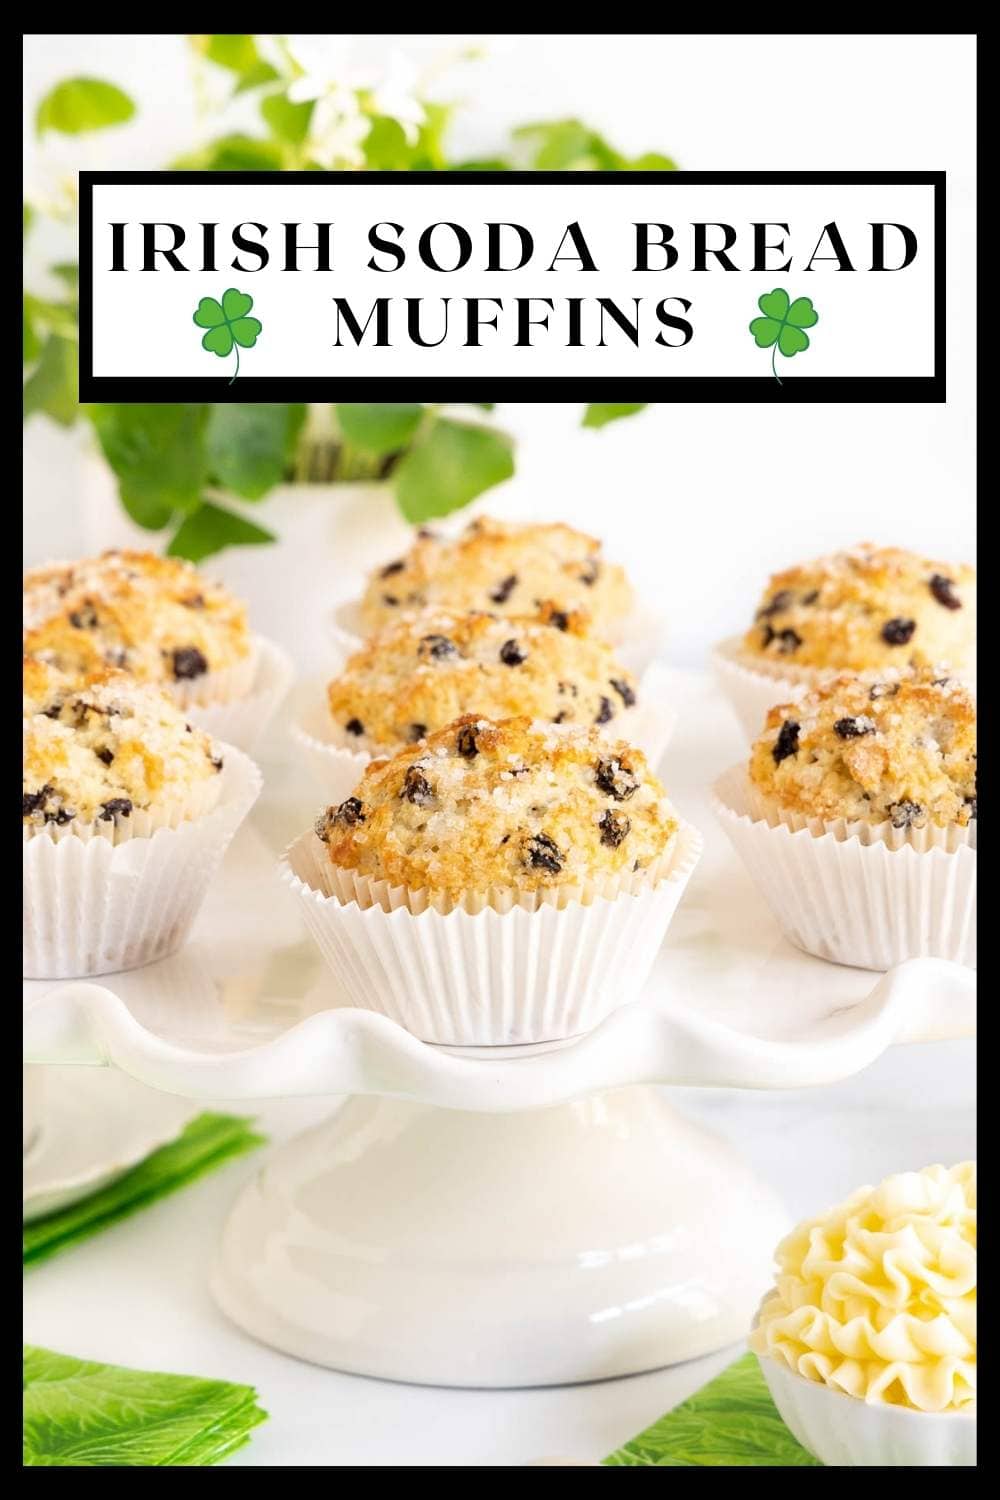 Irish Soda Bread Muffins (not so traditional but oh so delicious!)